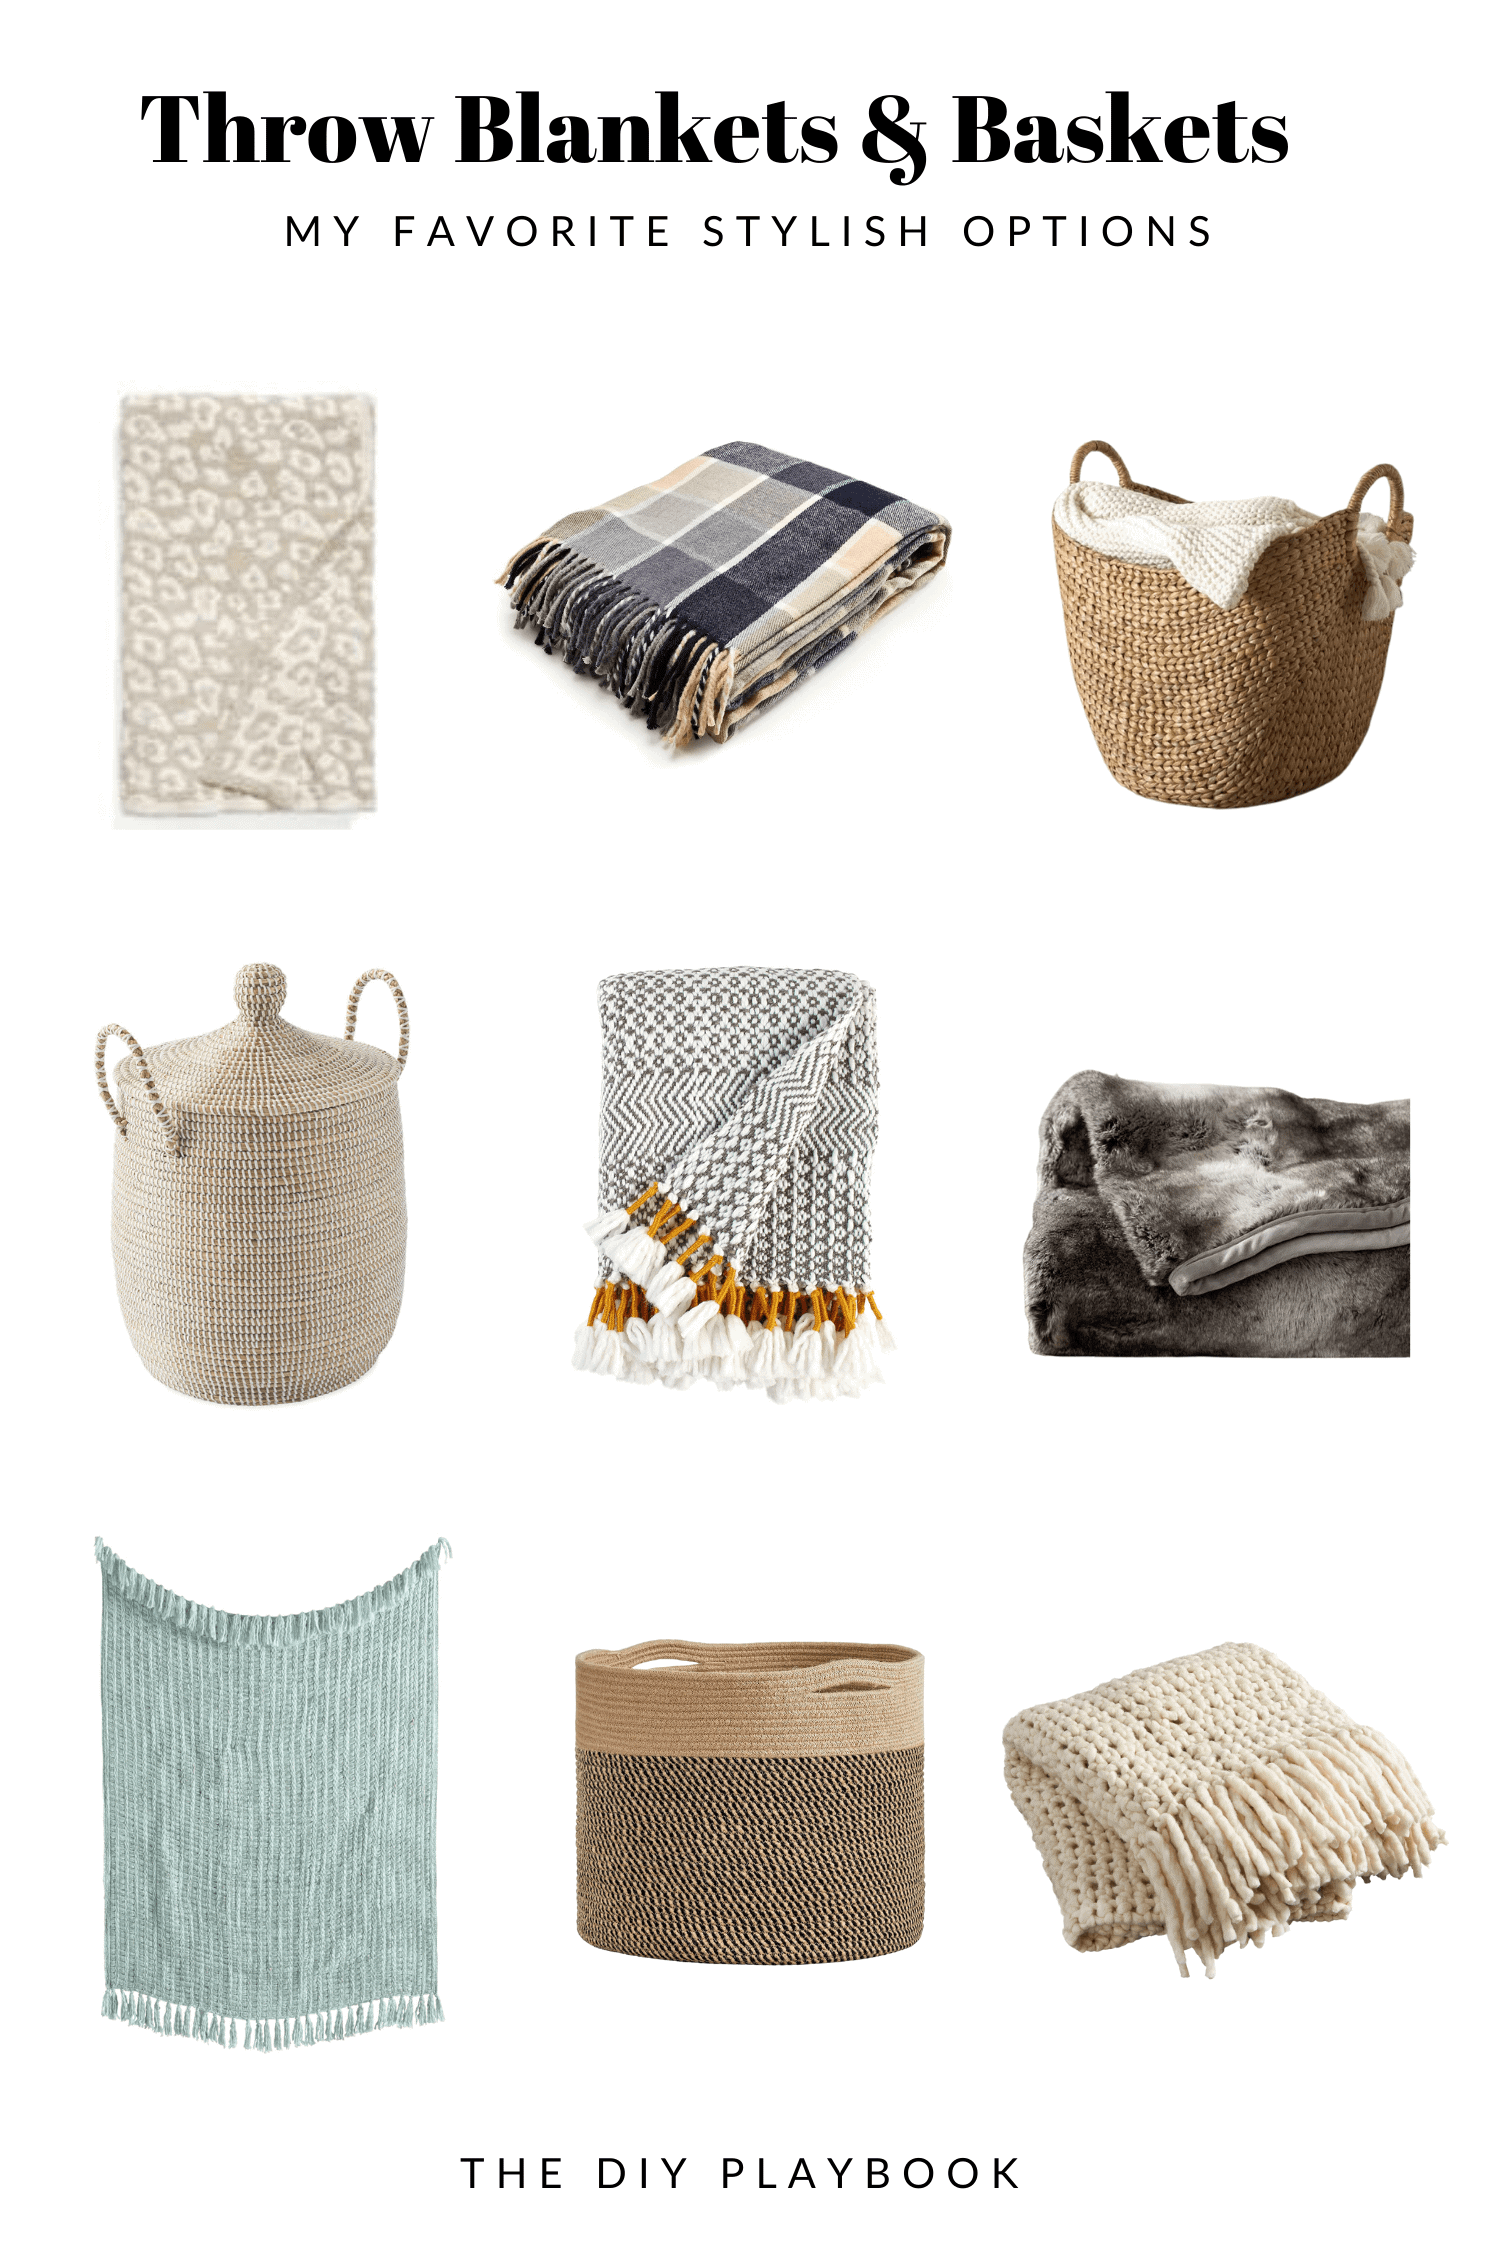 My favorite throw blankets and baskets